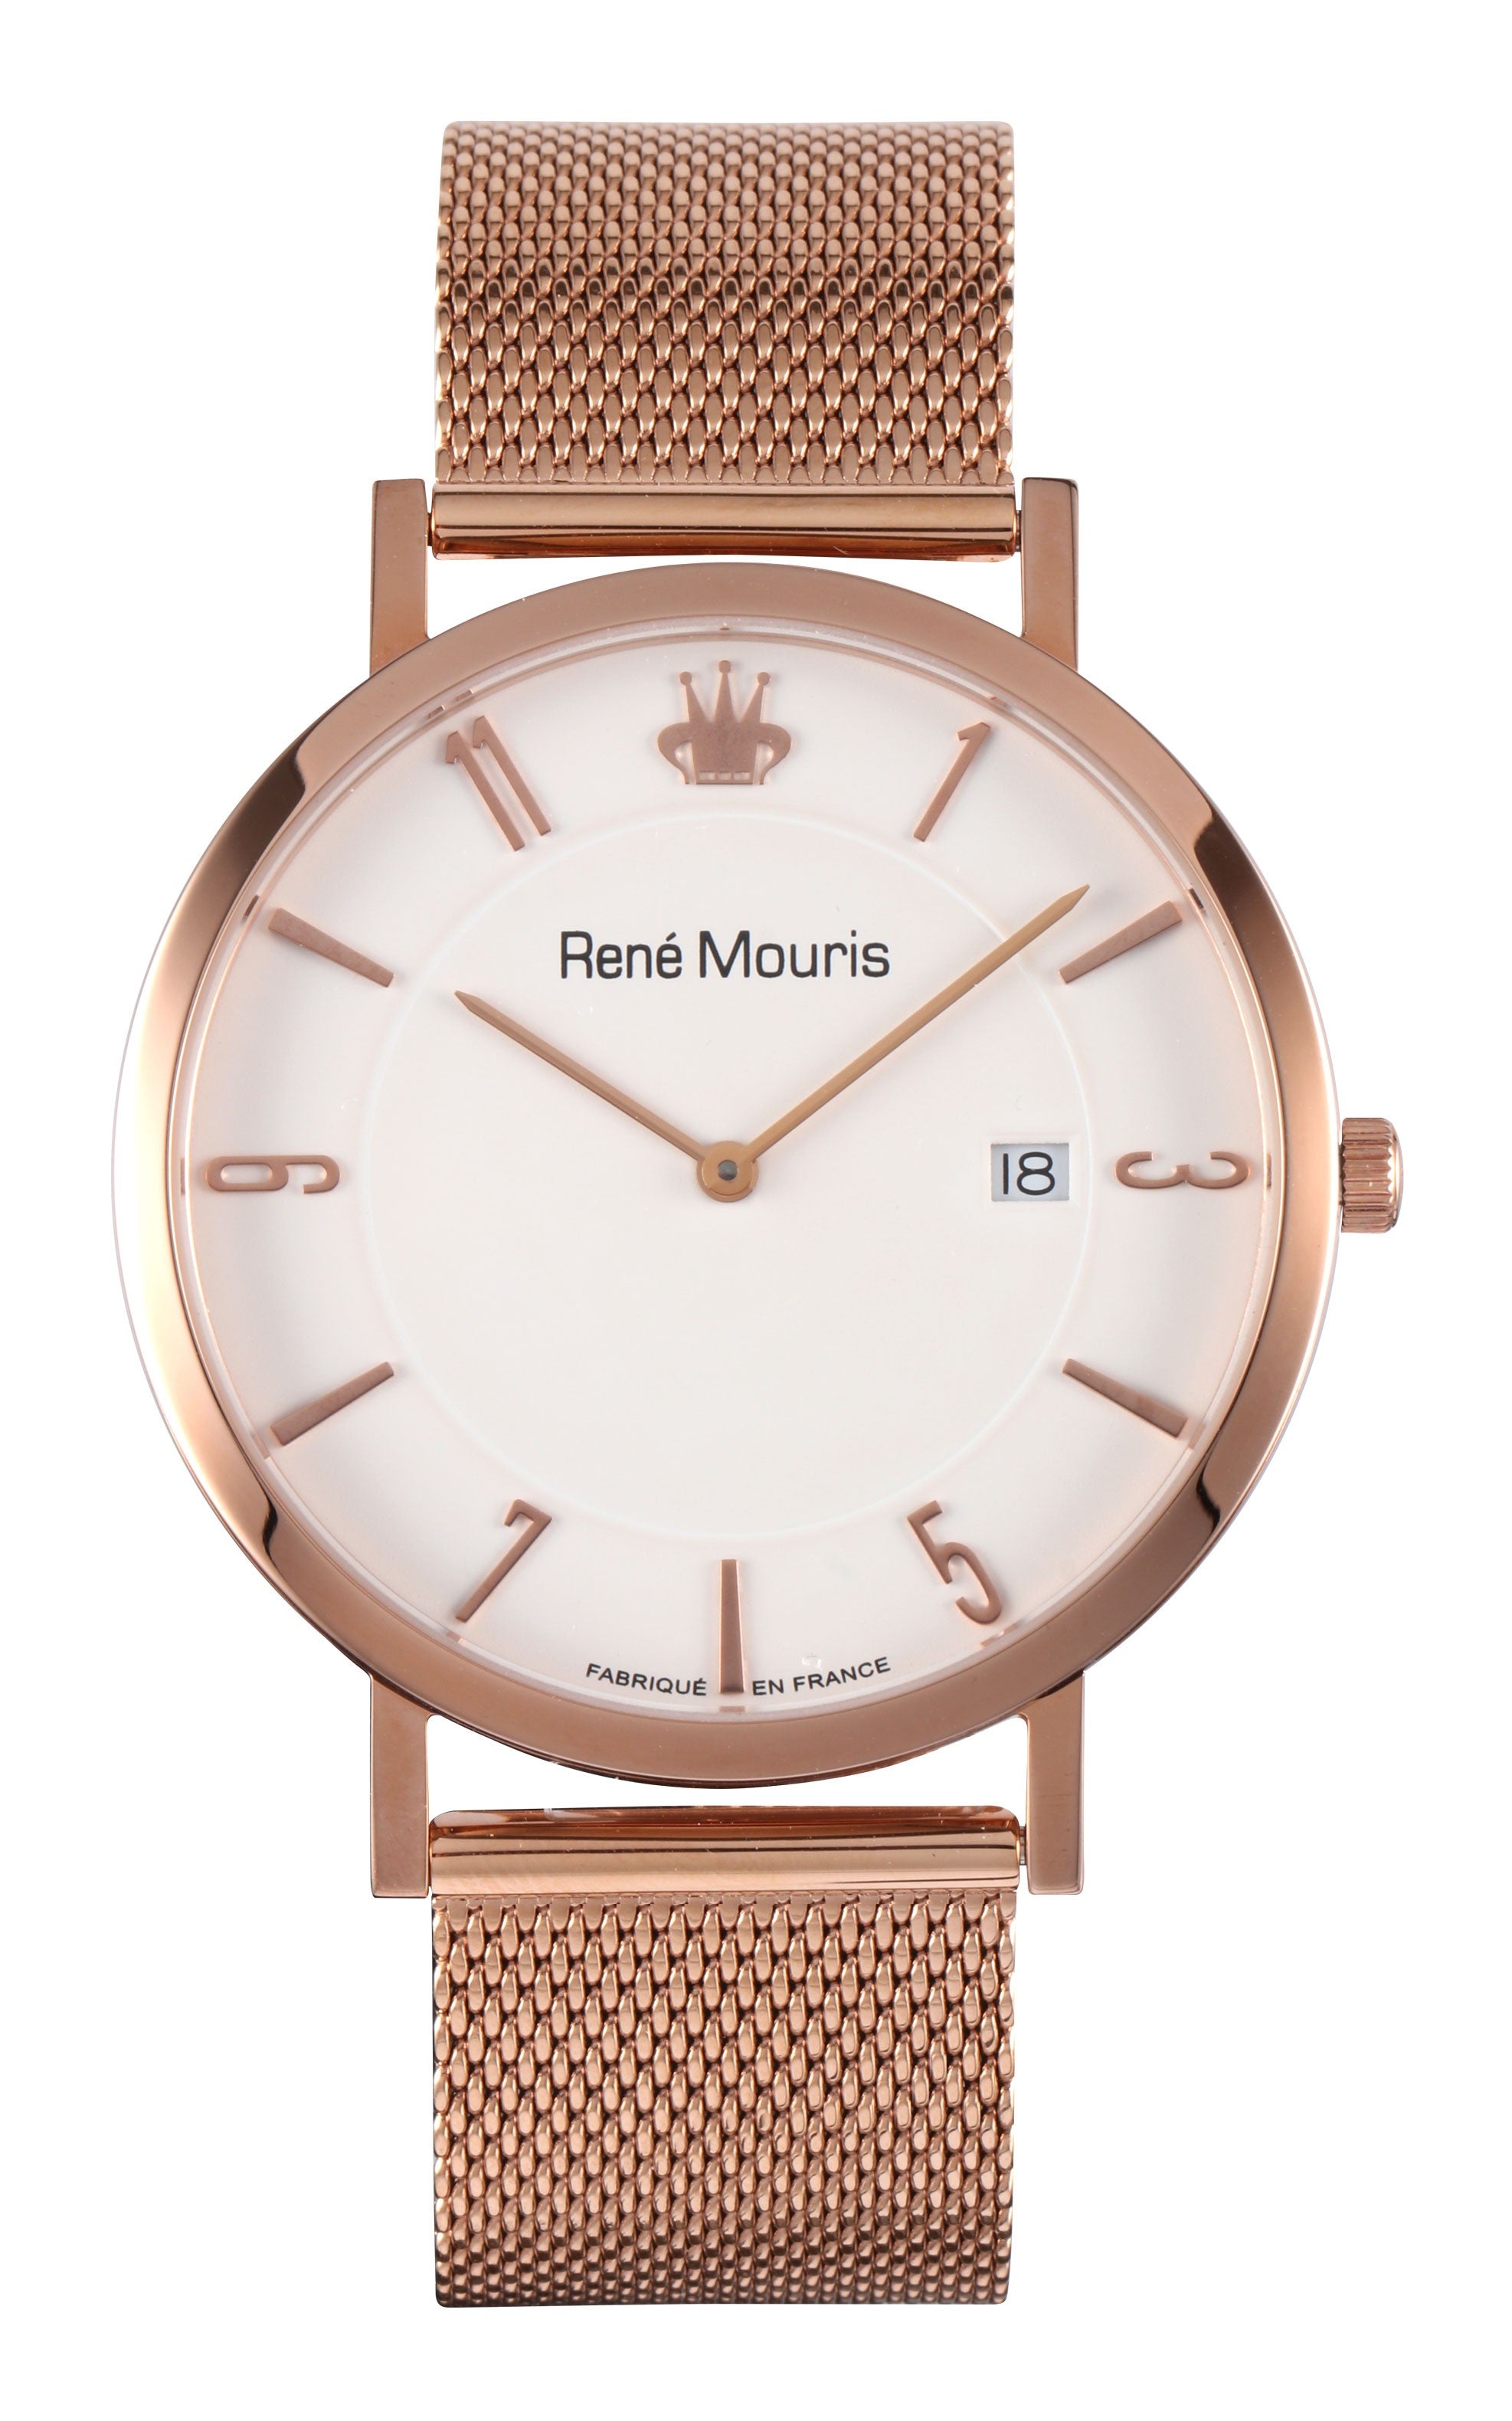 RENE MOURIS L'Emporter with Mesh Band UniSex